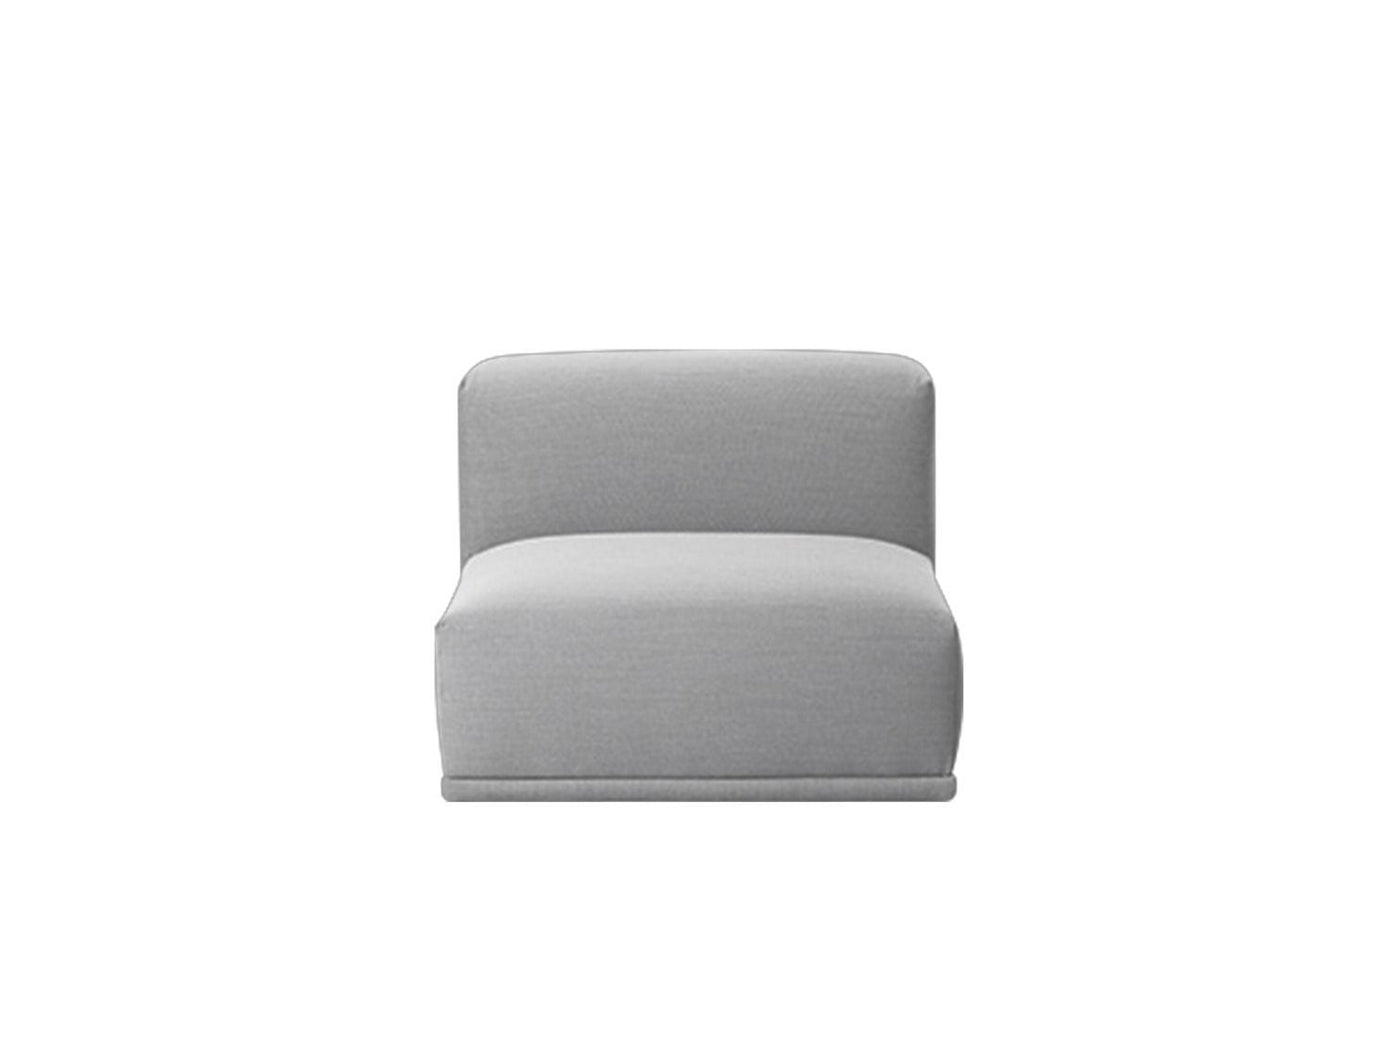 Muuto Connect Modular Sofa System, module d, short centre. Available from someday designs